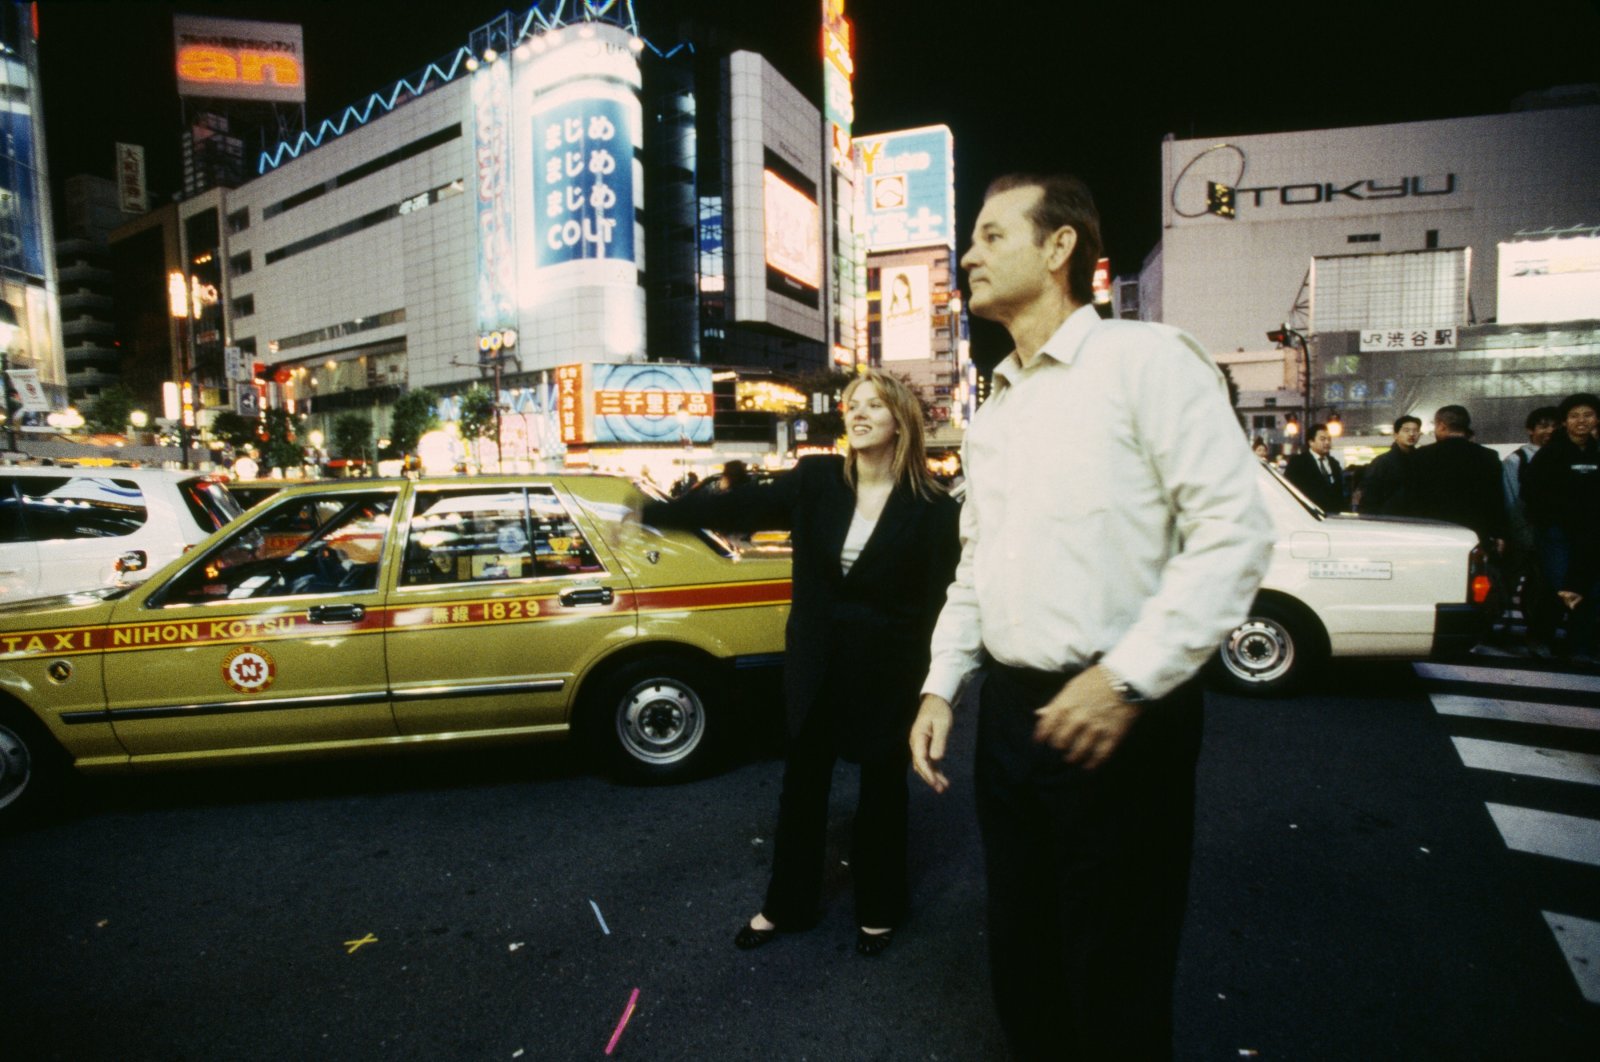 One of the most talked-about films of the 2000s, the Oscar-winning &quot;Lost in Translation&quot; deals with the unexpected relationship that develops between two Americans who feel displaced in a city far from home. (Photo courtesy of Pera Film)